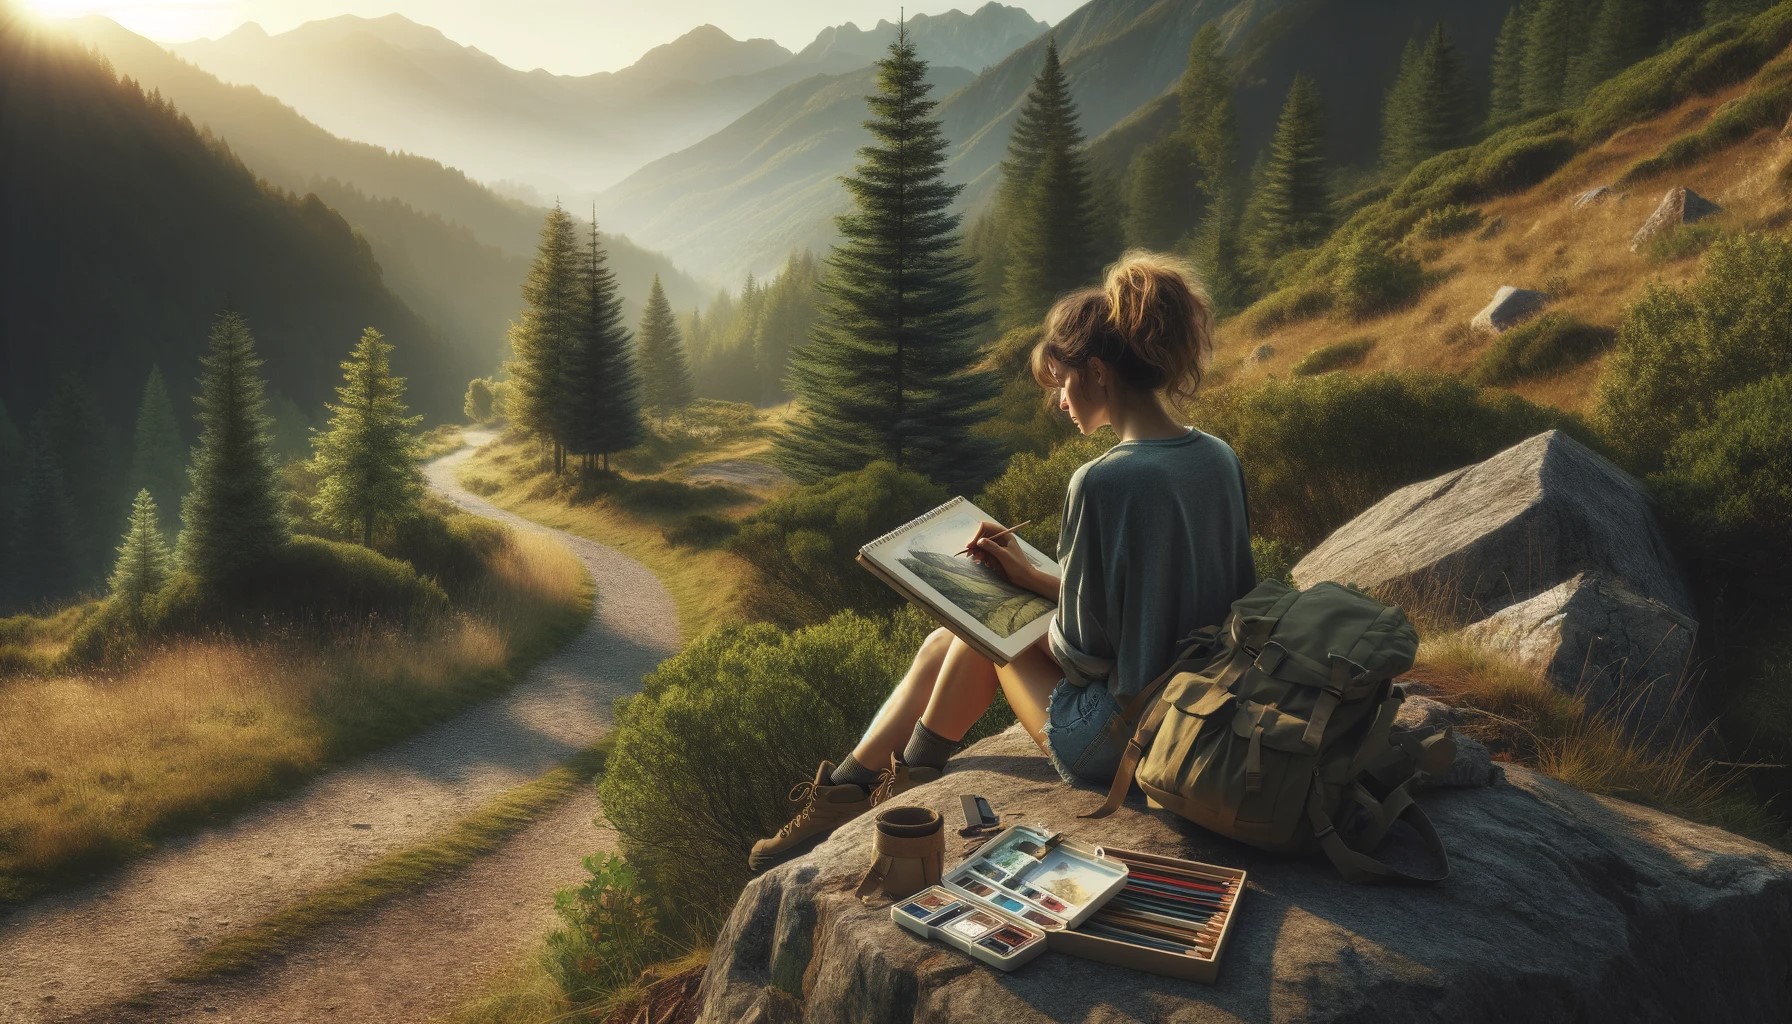 hiker sitting on a rock along a scenic hiking trail, deeply engaged in sketching the surrounding landscape. The landscap